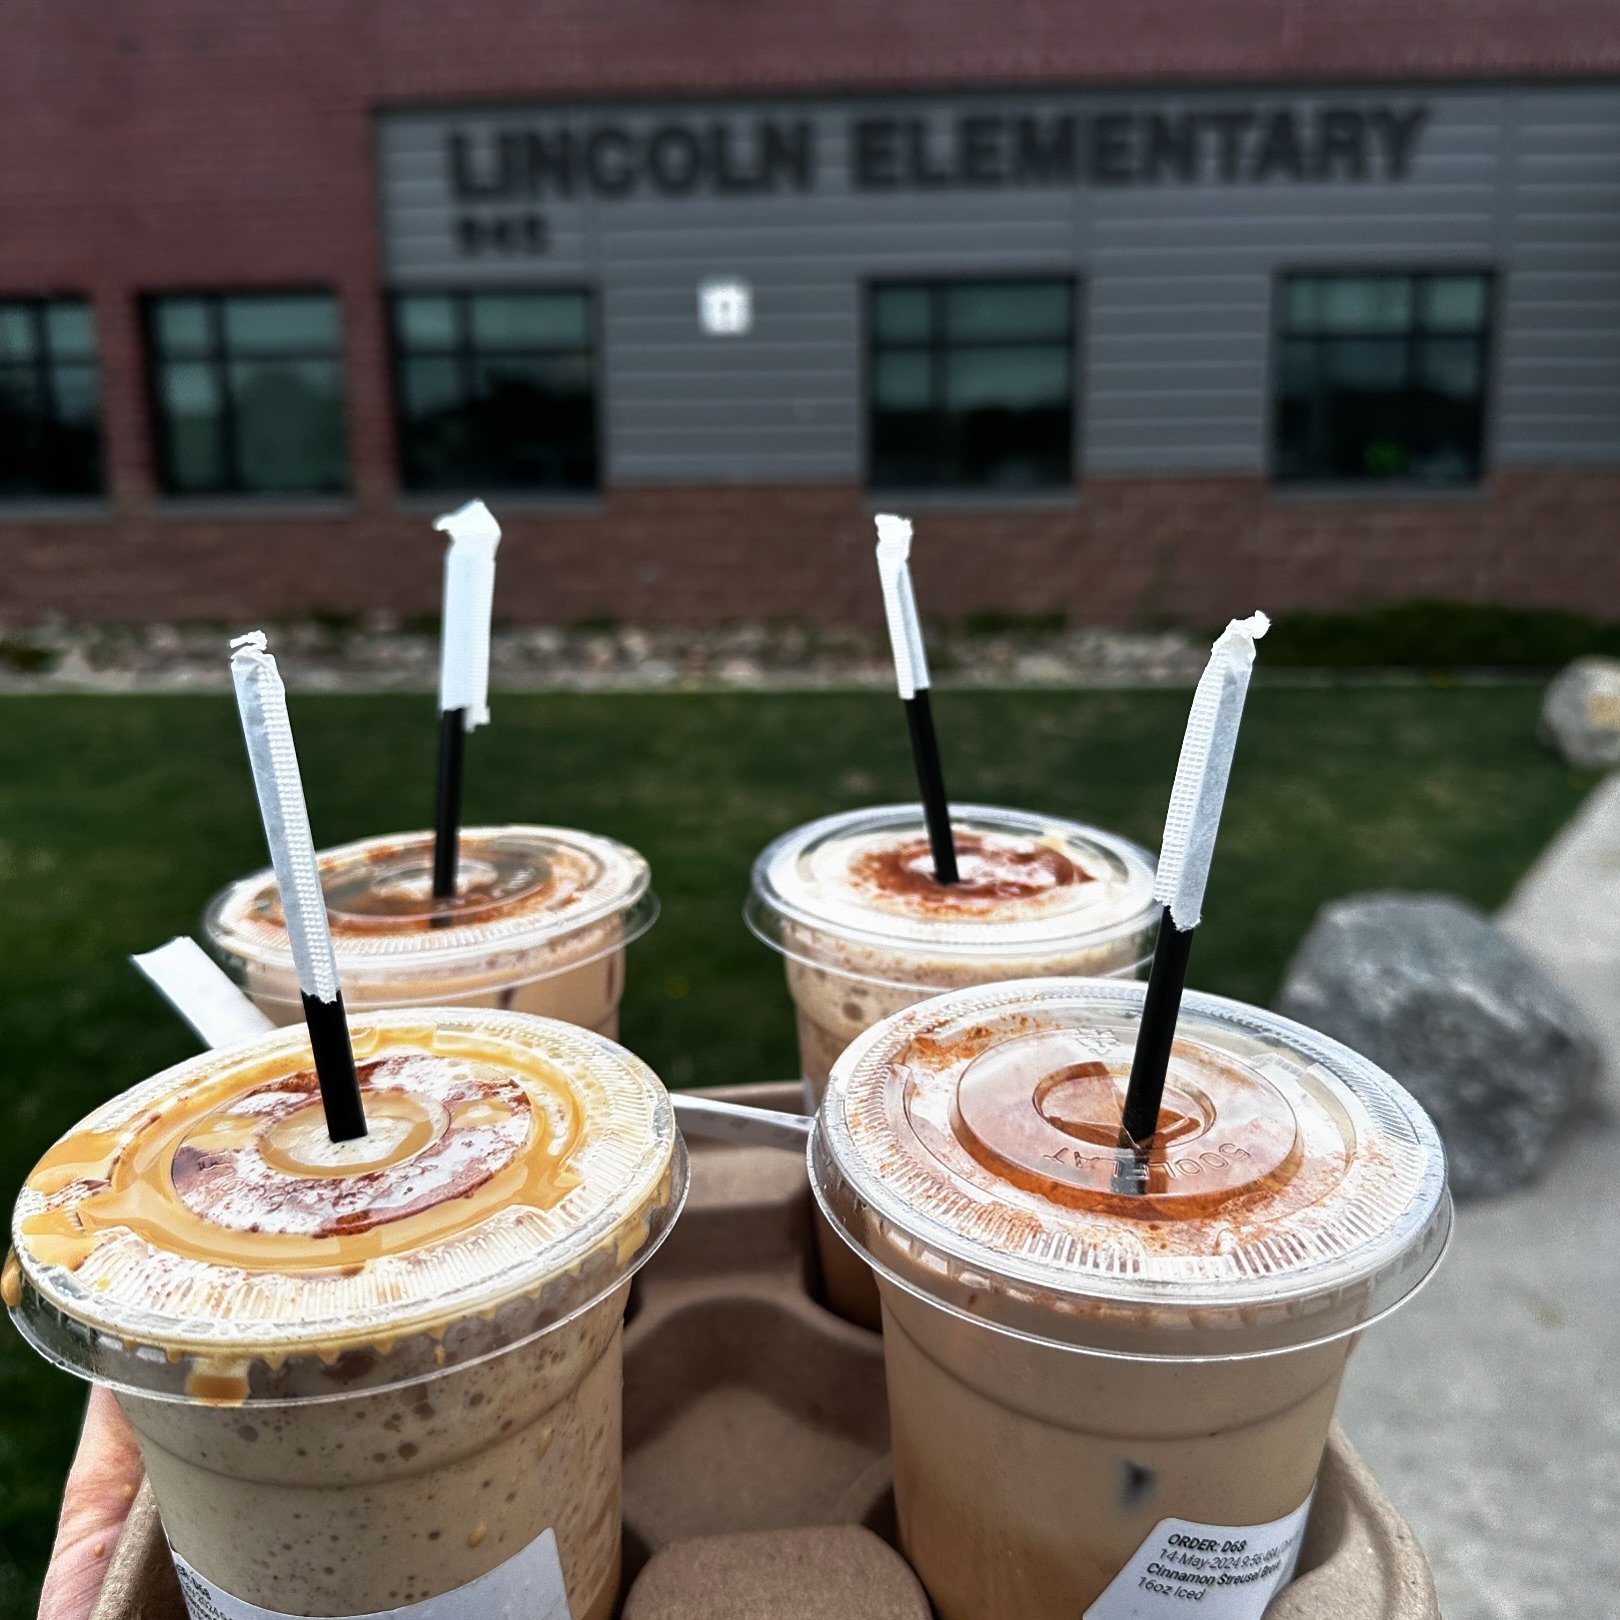 Lincoln Elementary getting some love today! 

Teacher appreciation week is over but our free school delivery is not! Spots are limited so call the shop, set up your delivery time, school, order, and pay by phone. We will make sure you get yummy coffe